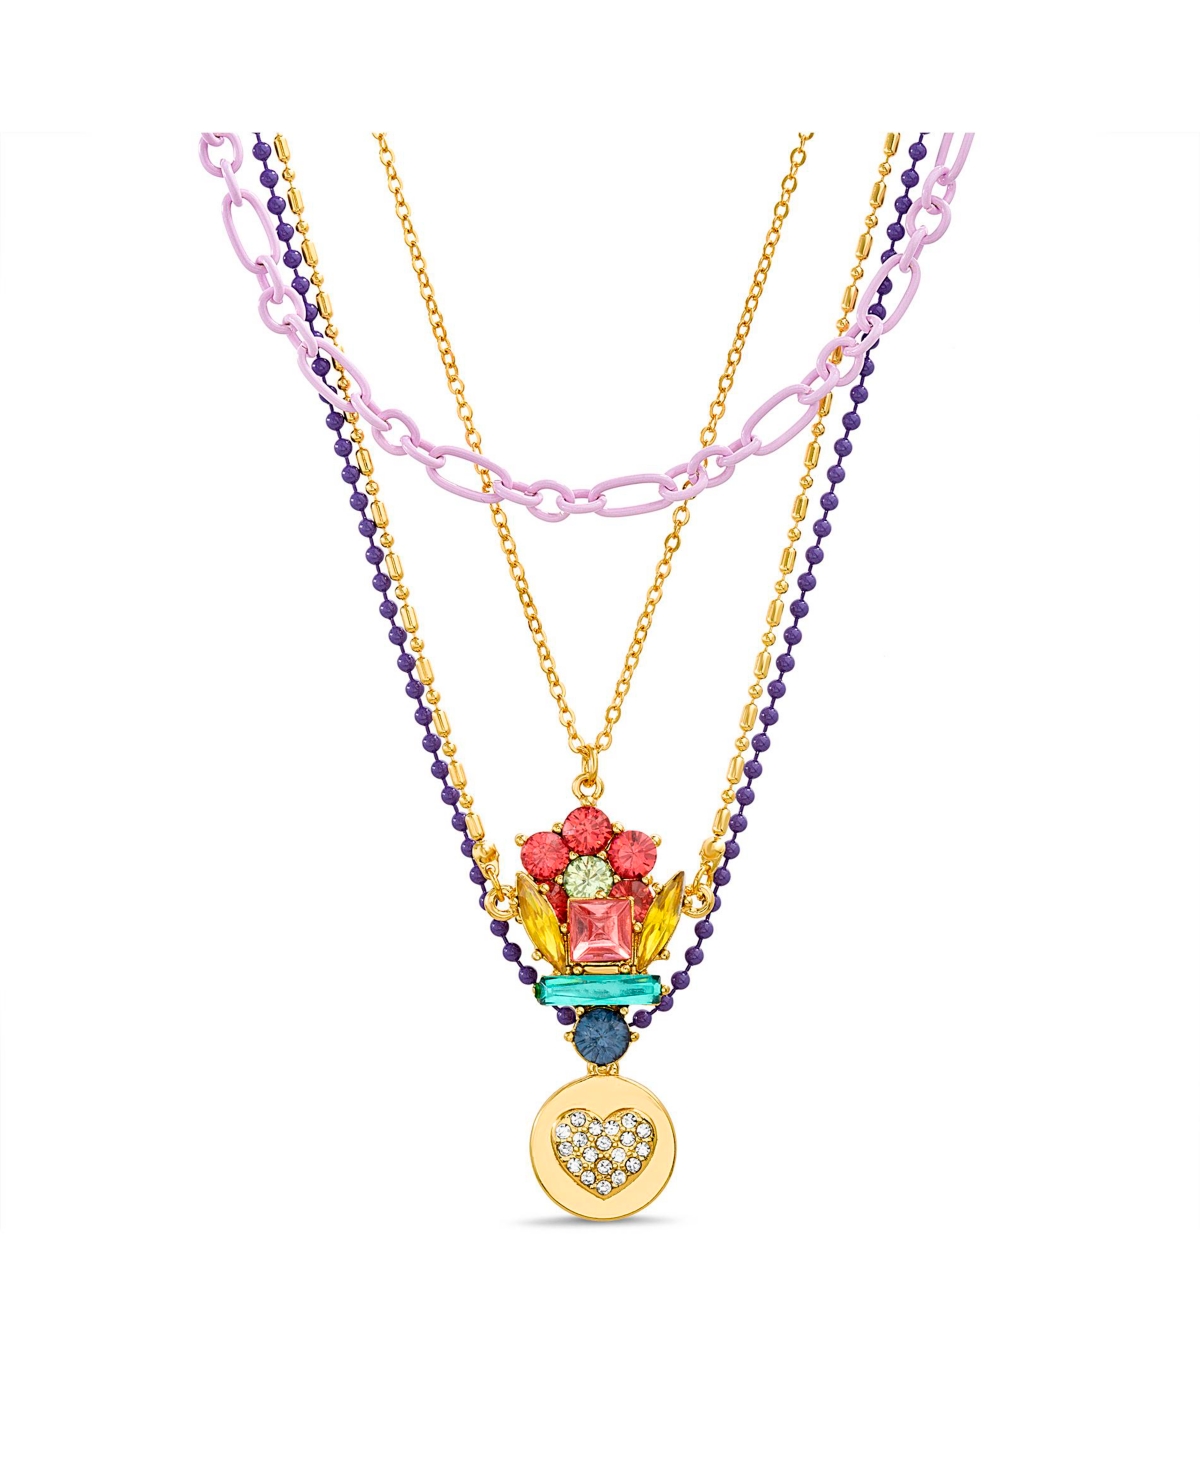 Multi 4 Piece Mixed Chain Necklace Set with Flower, Cluster and Heart Disc Charm Pendants - Multi